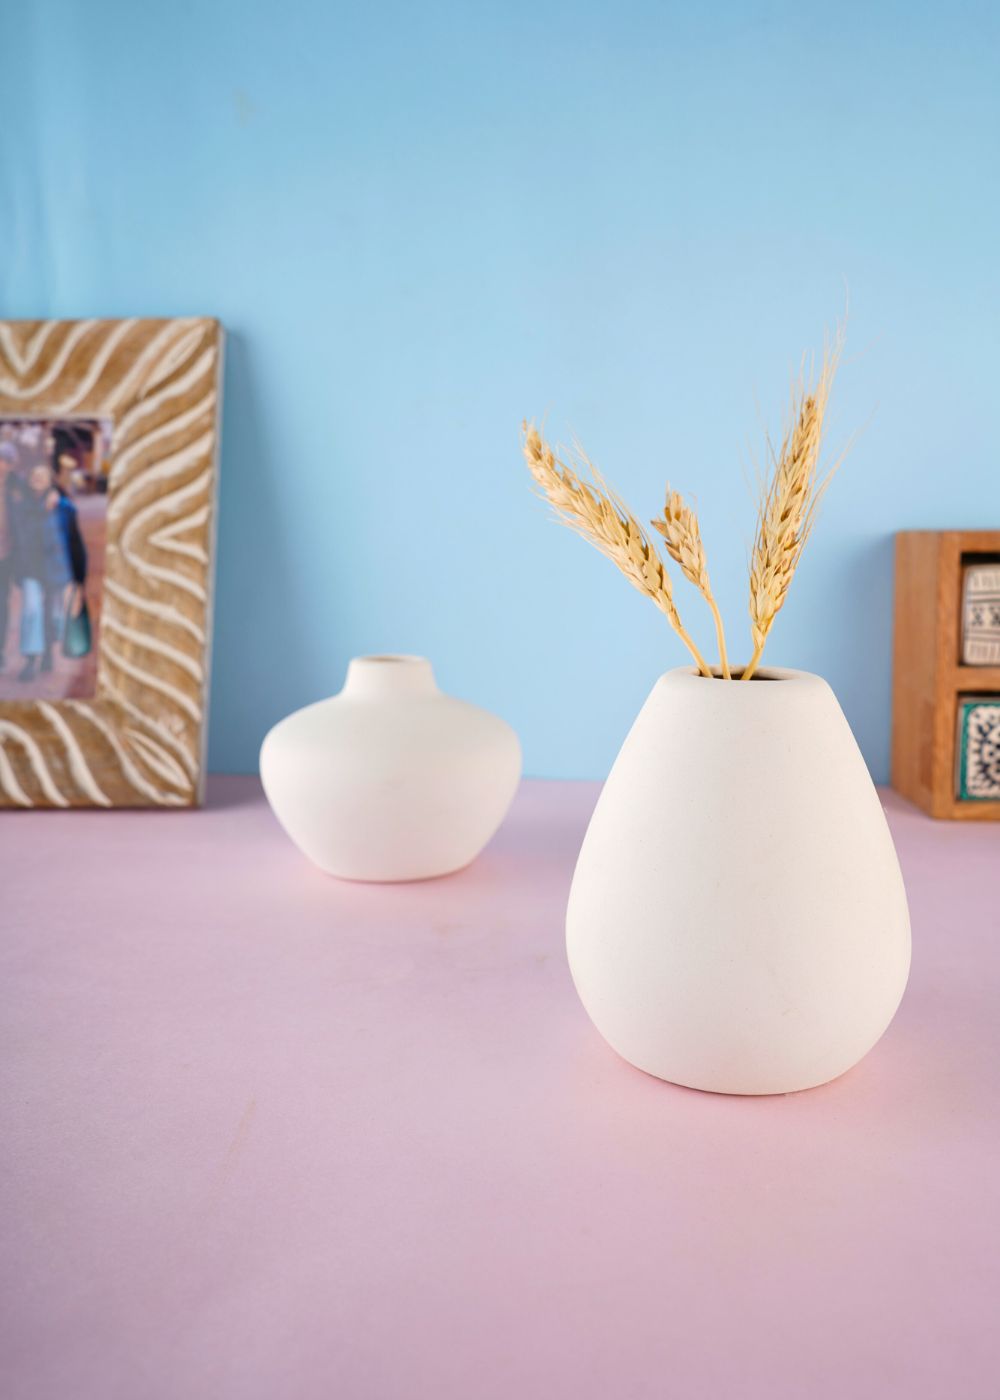 esoteric vases made by ceramic